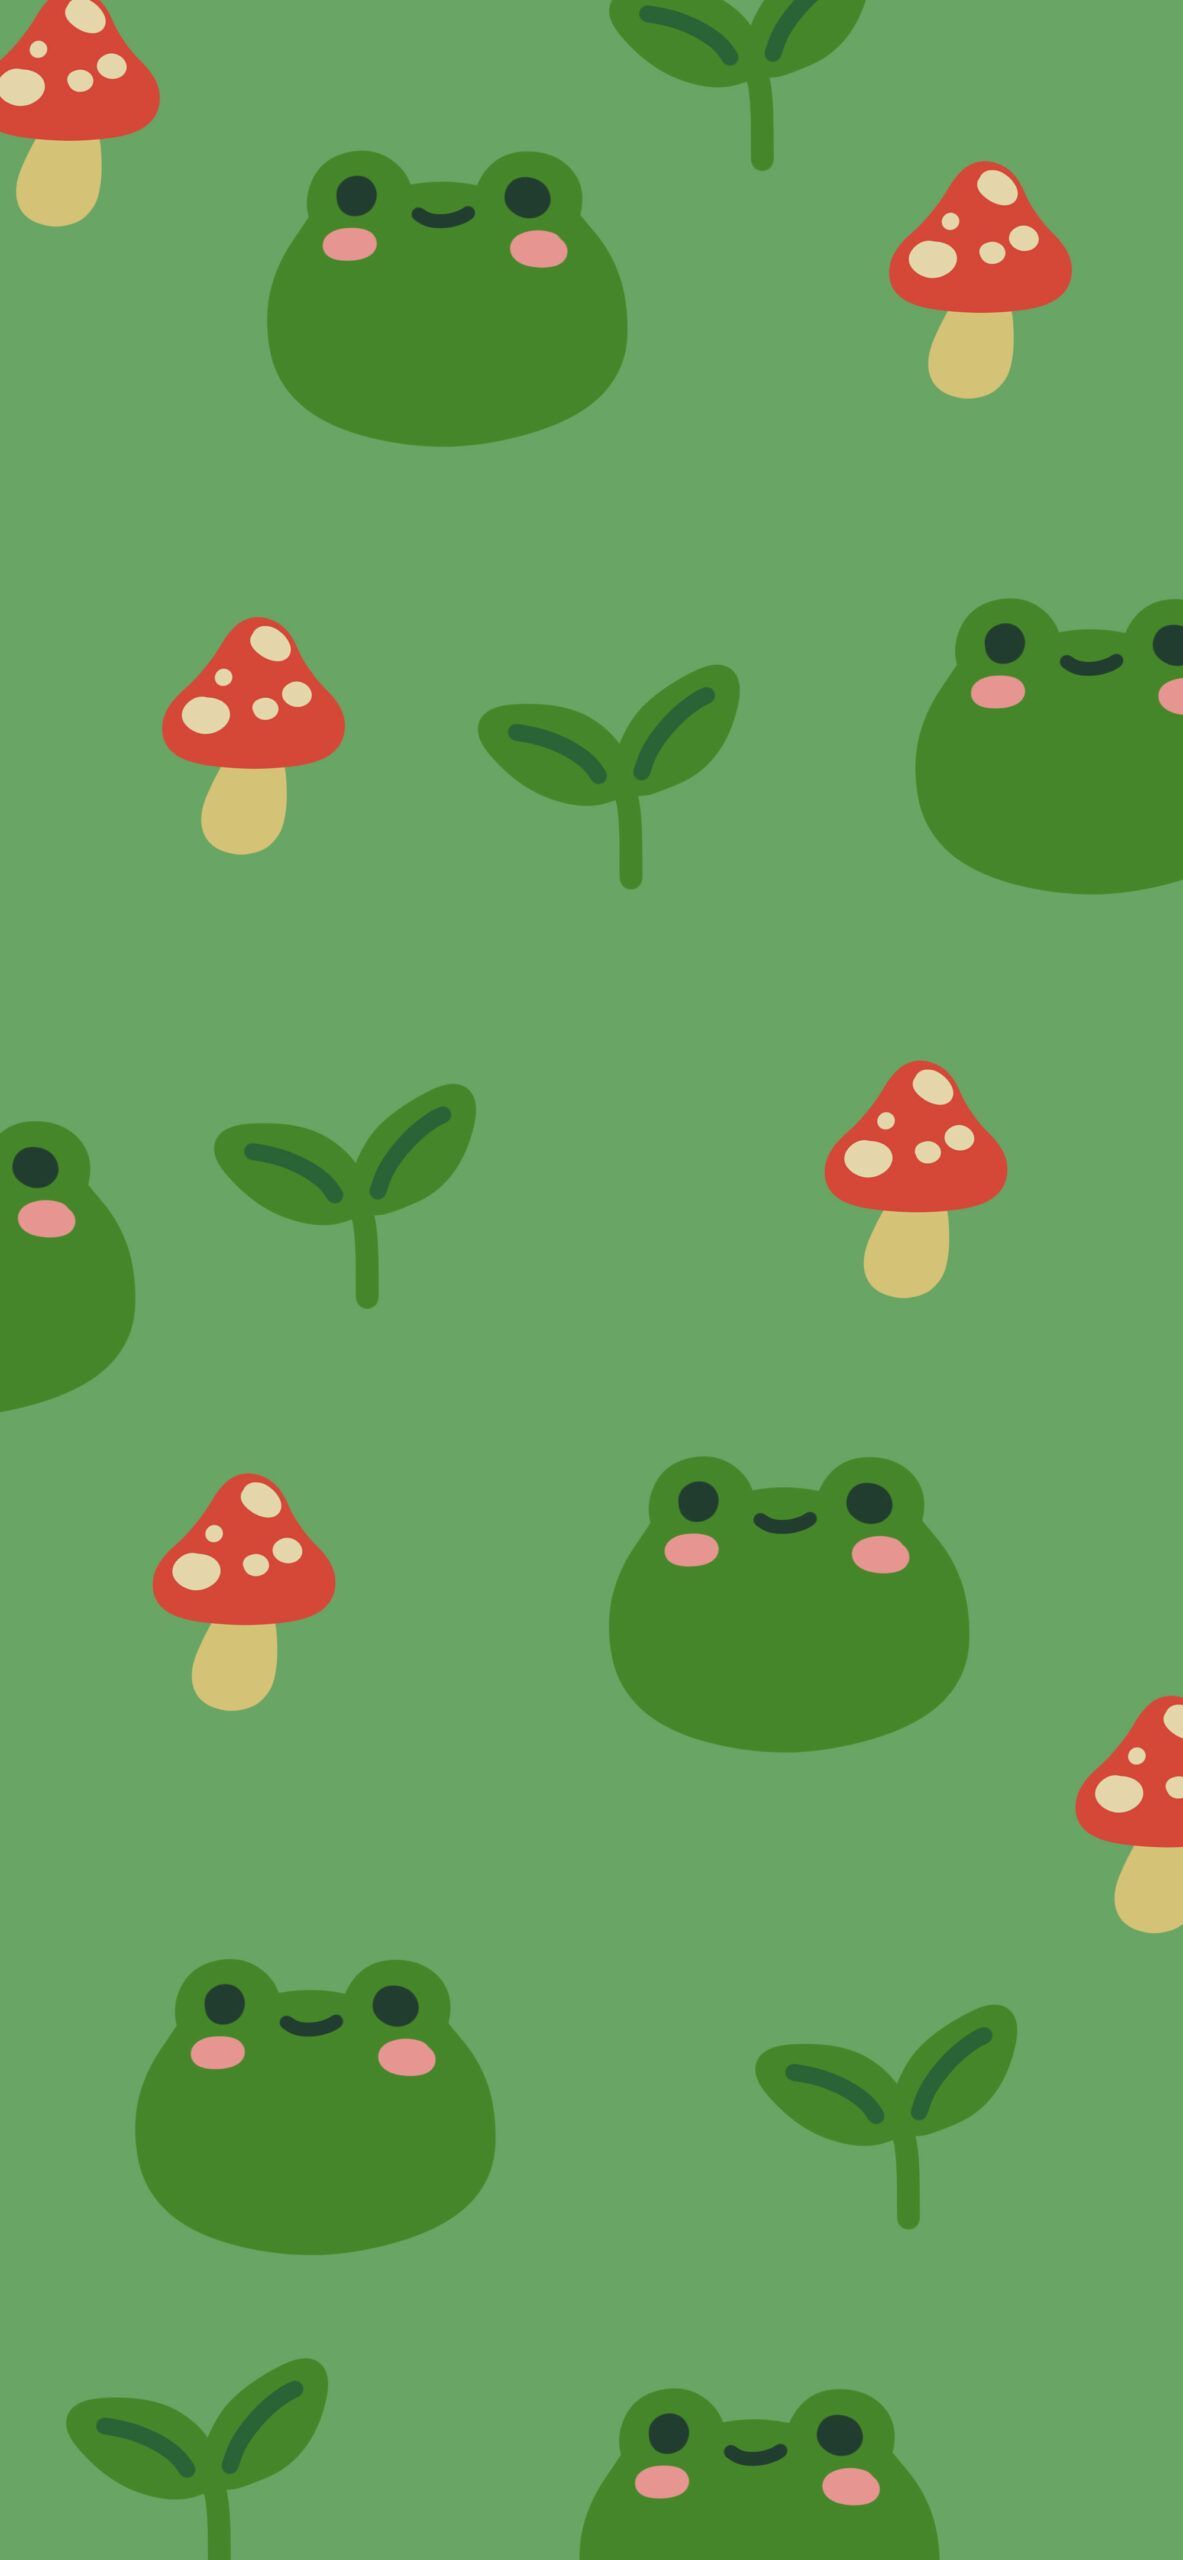 A pattern of green frogs and mushrooms - Frog, kawaii